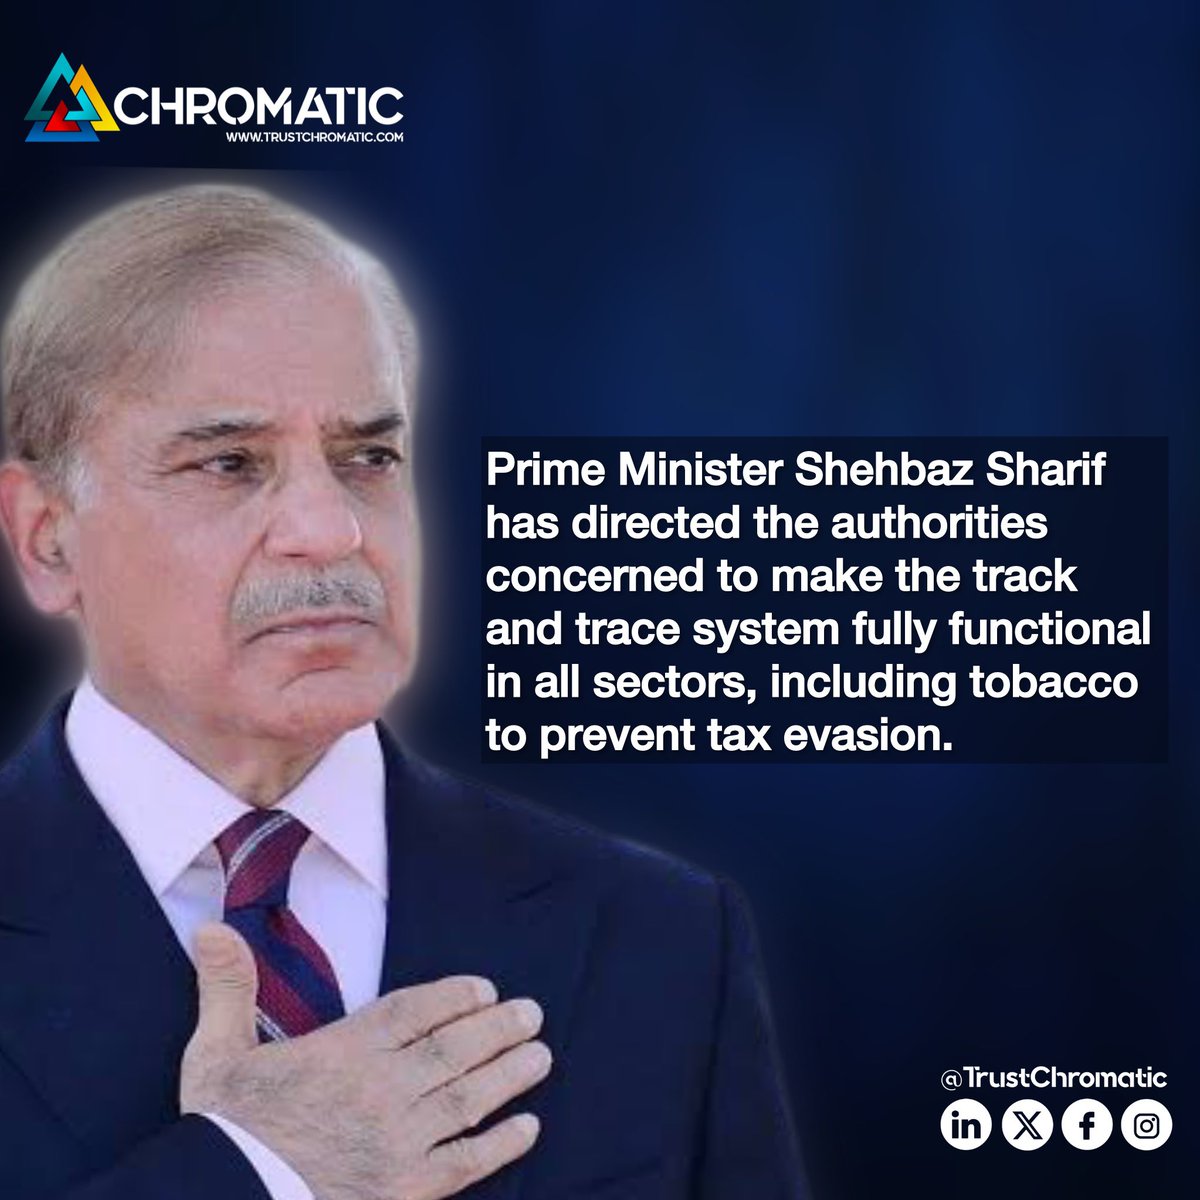 In a bold initiative to combat tobacco industry tax evasion, the Prime Minister @CMShehbaz champions a sophisticated track and trace system, set to disrupt the shadow economy. A high-level committee will address any system implementation barriers, ensuring transparent and…